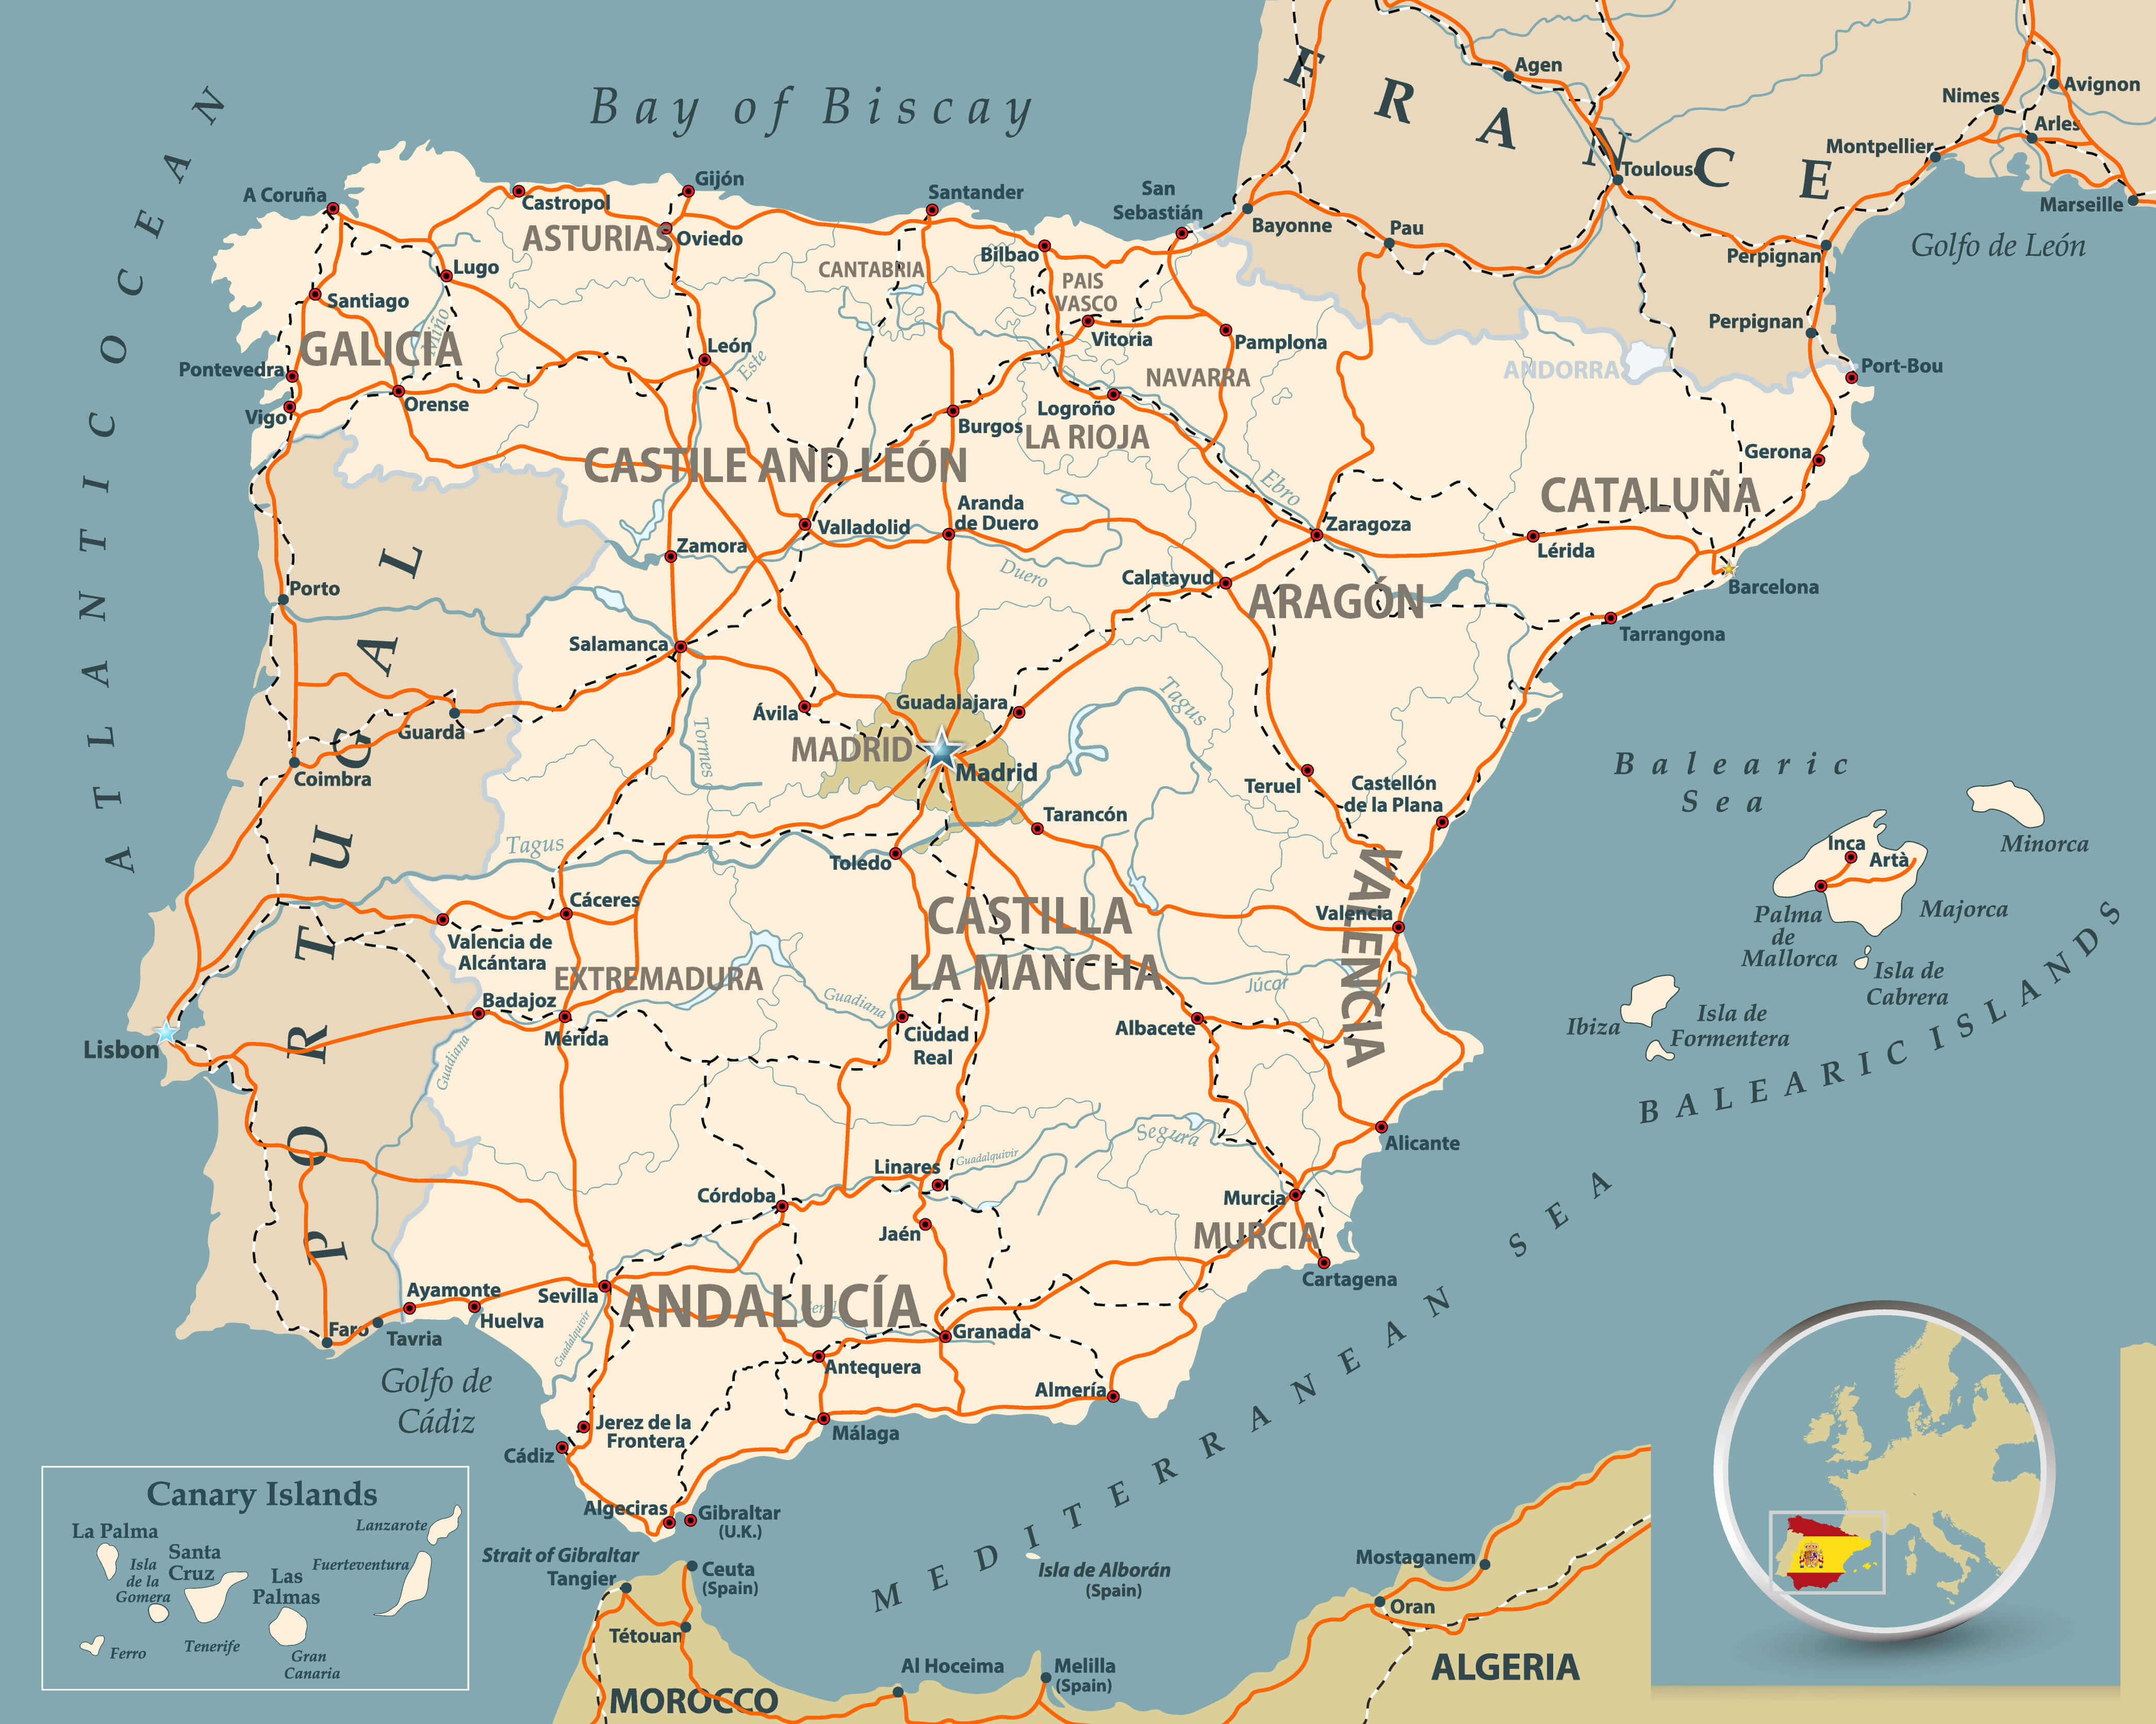 Road map of Spain with highways